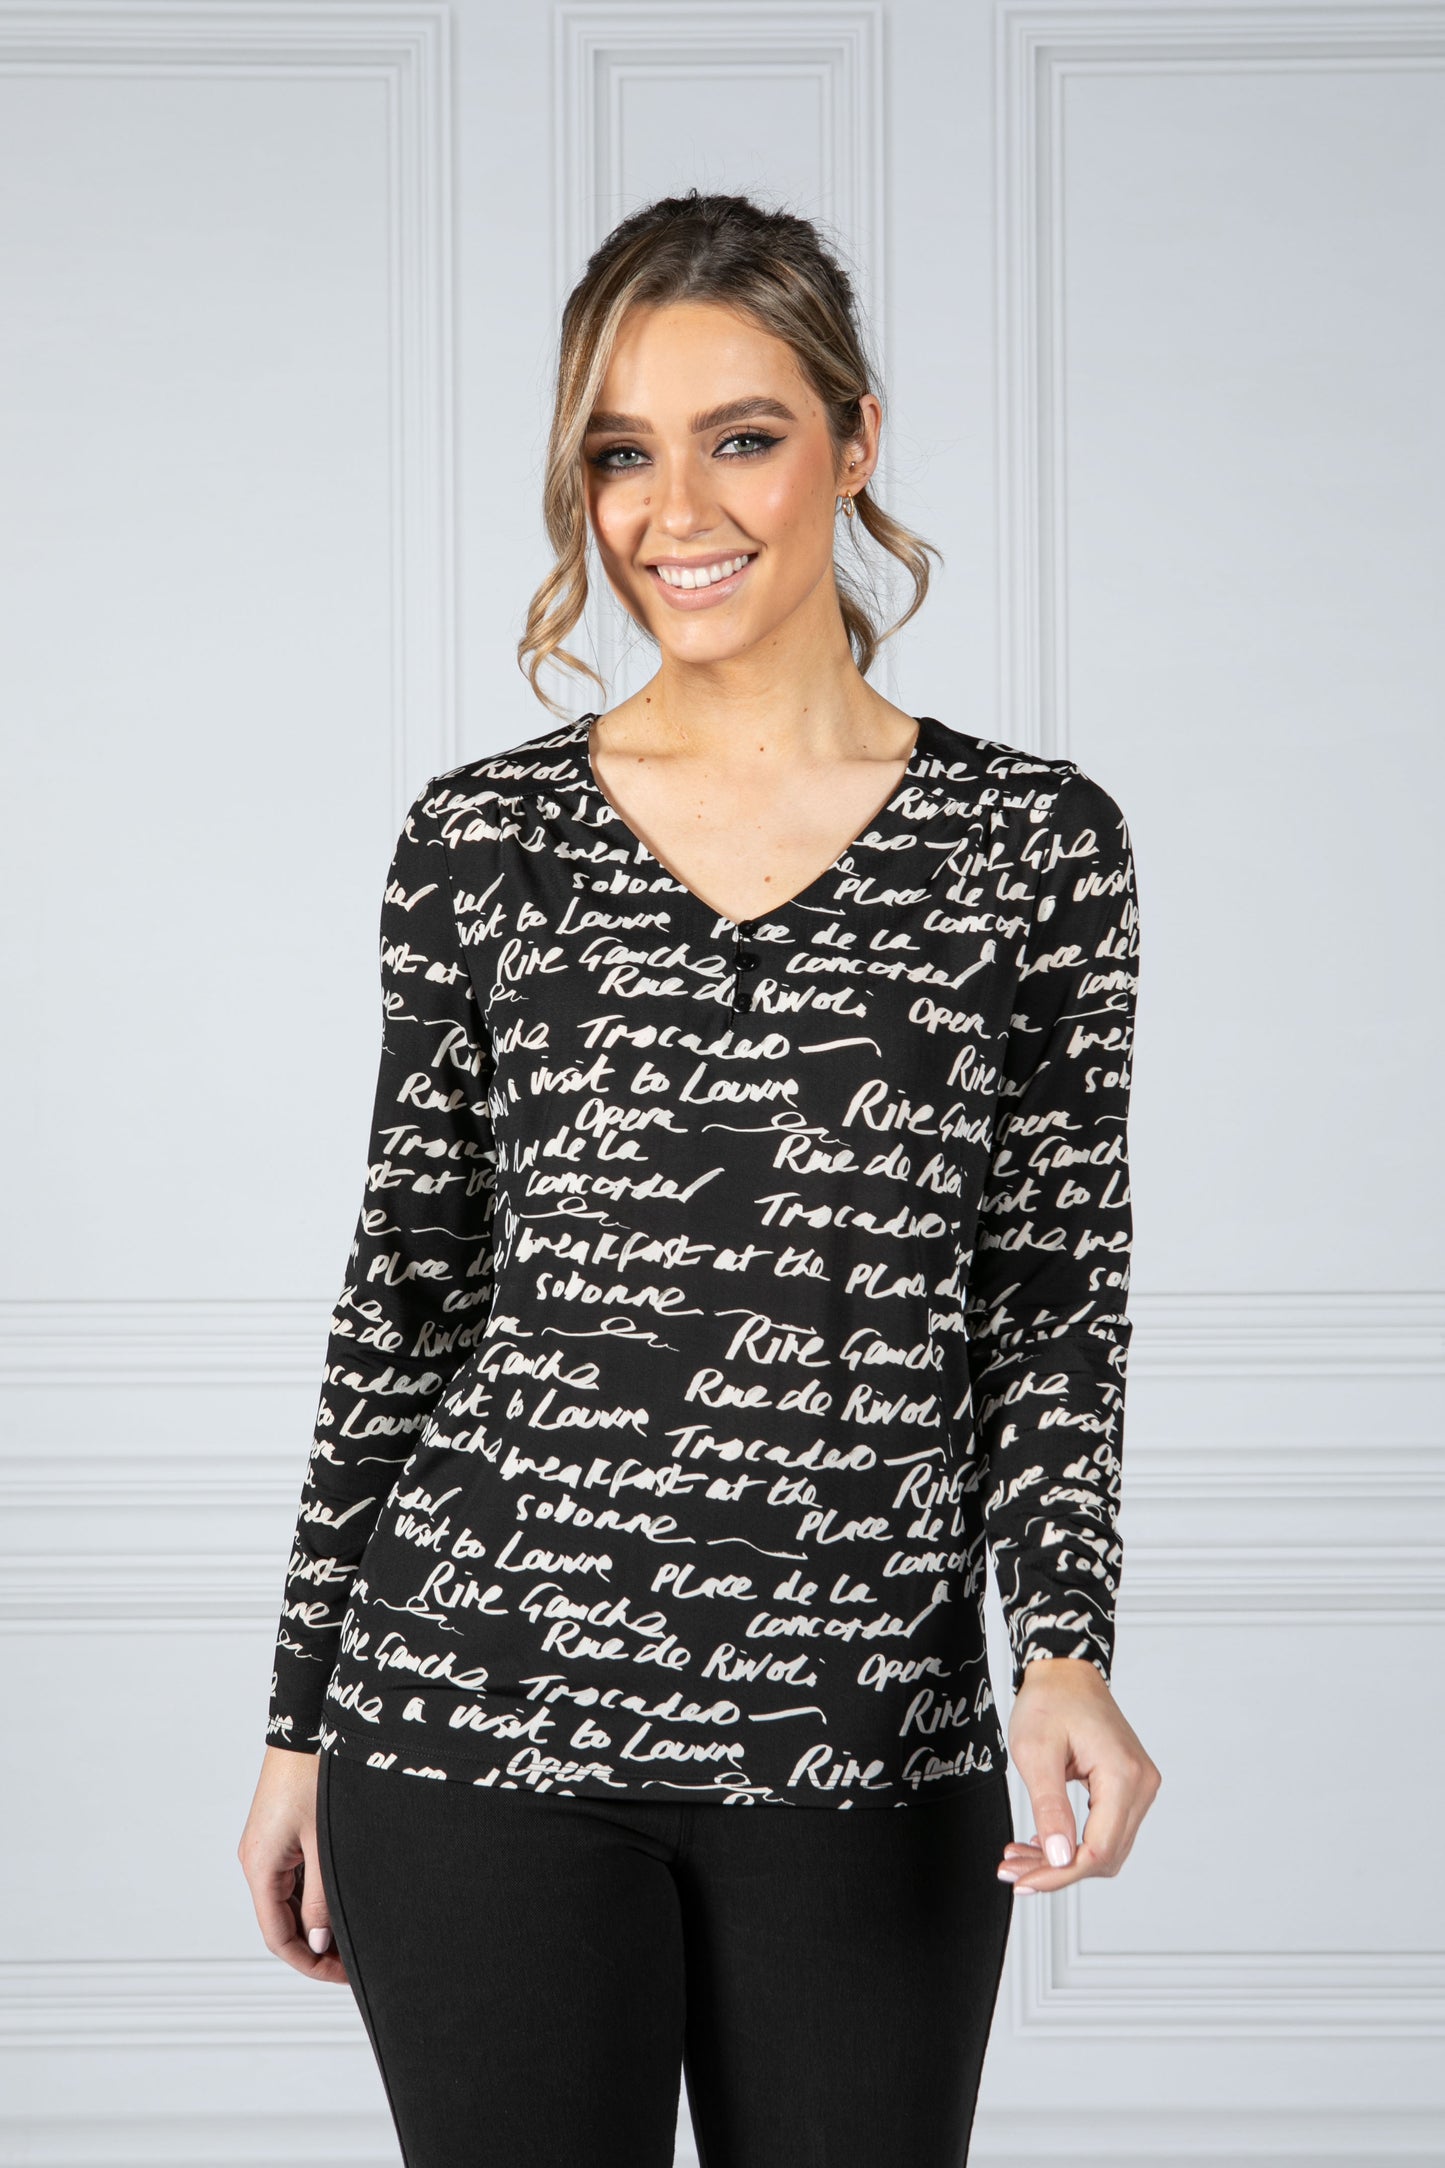 Letter Print Top in Black and White